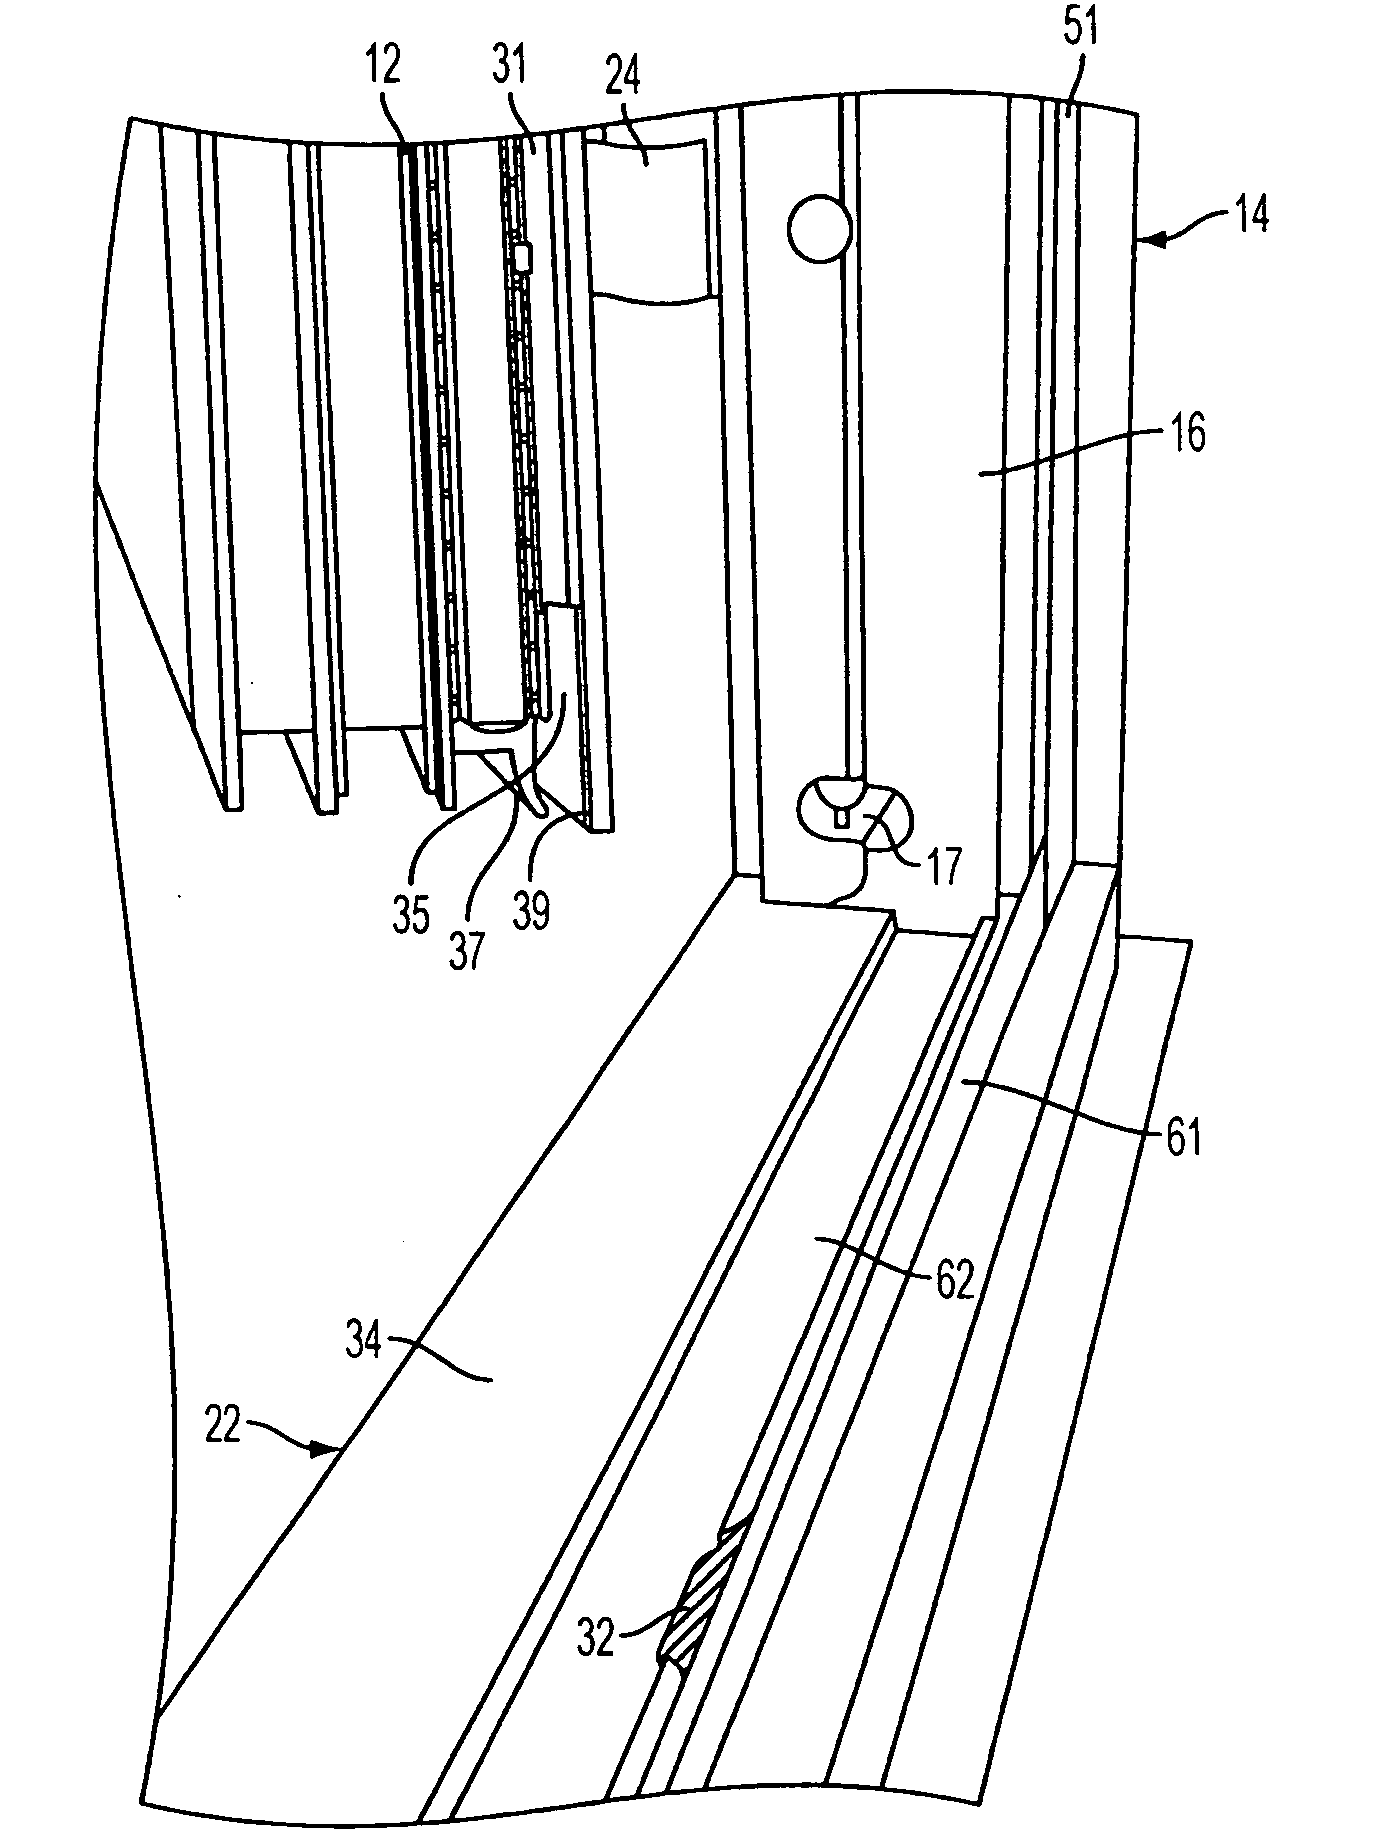 Method of and system for sealing an entry